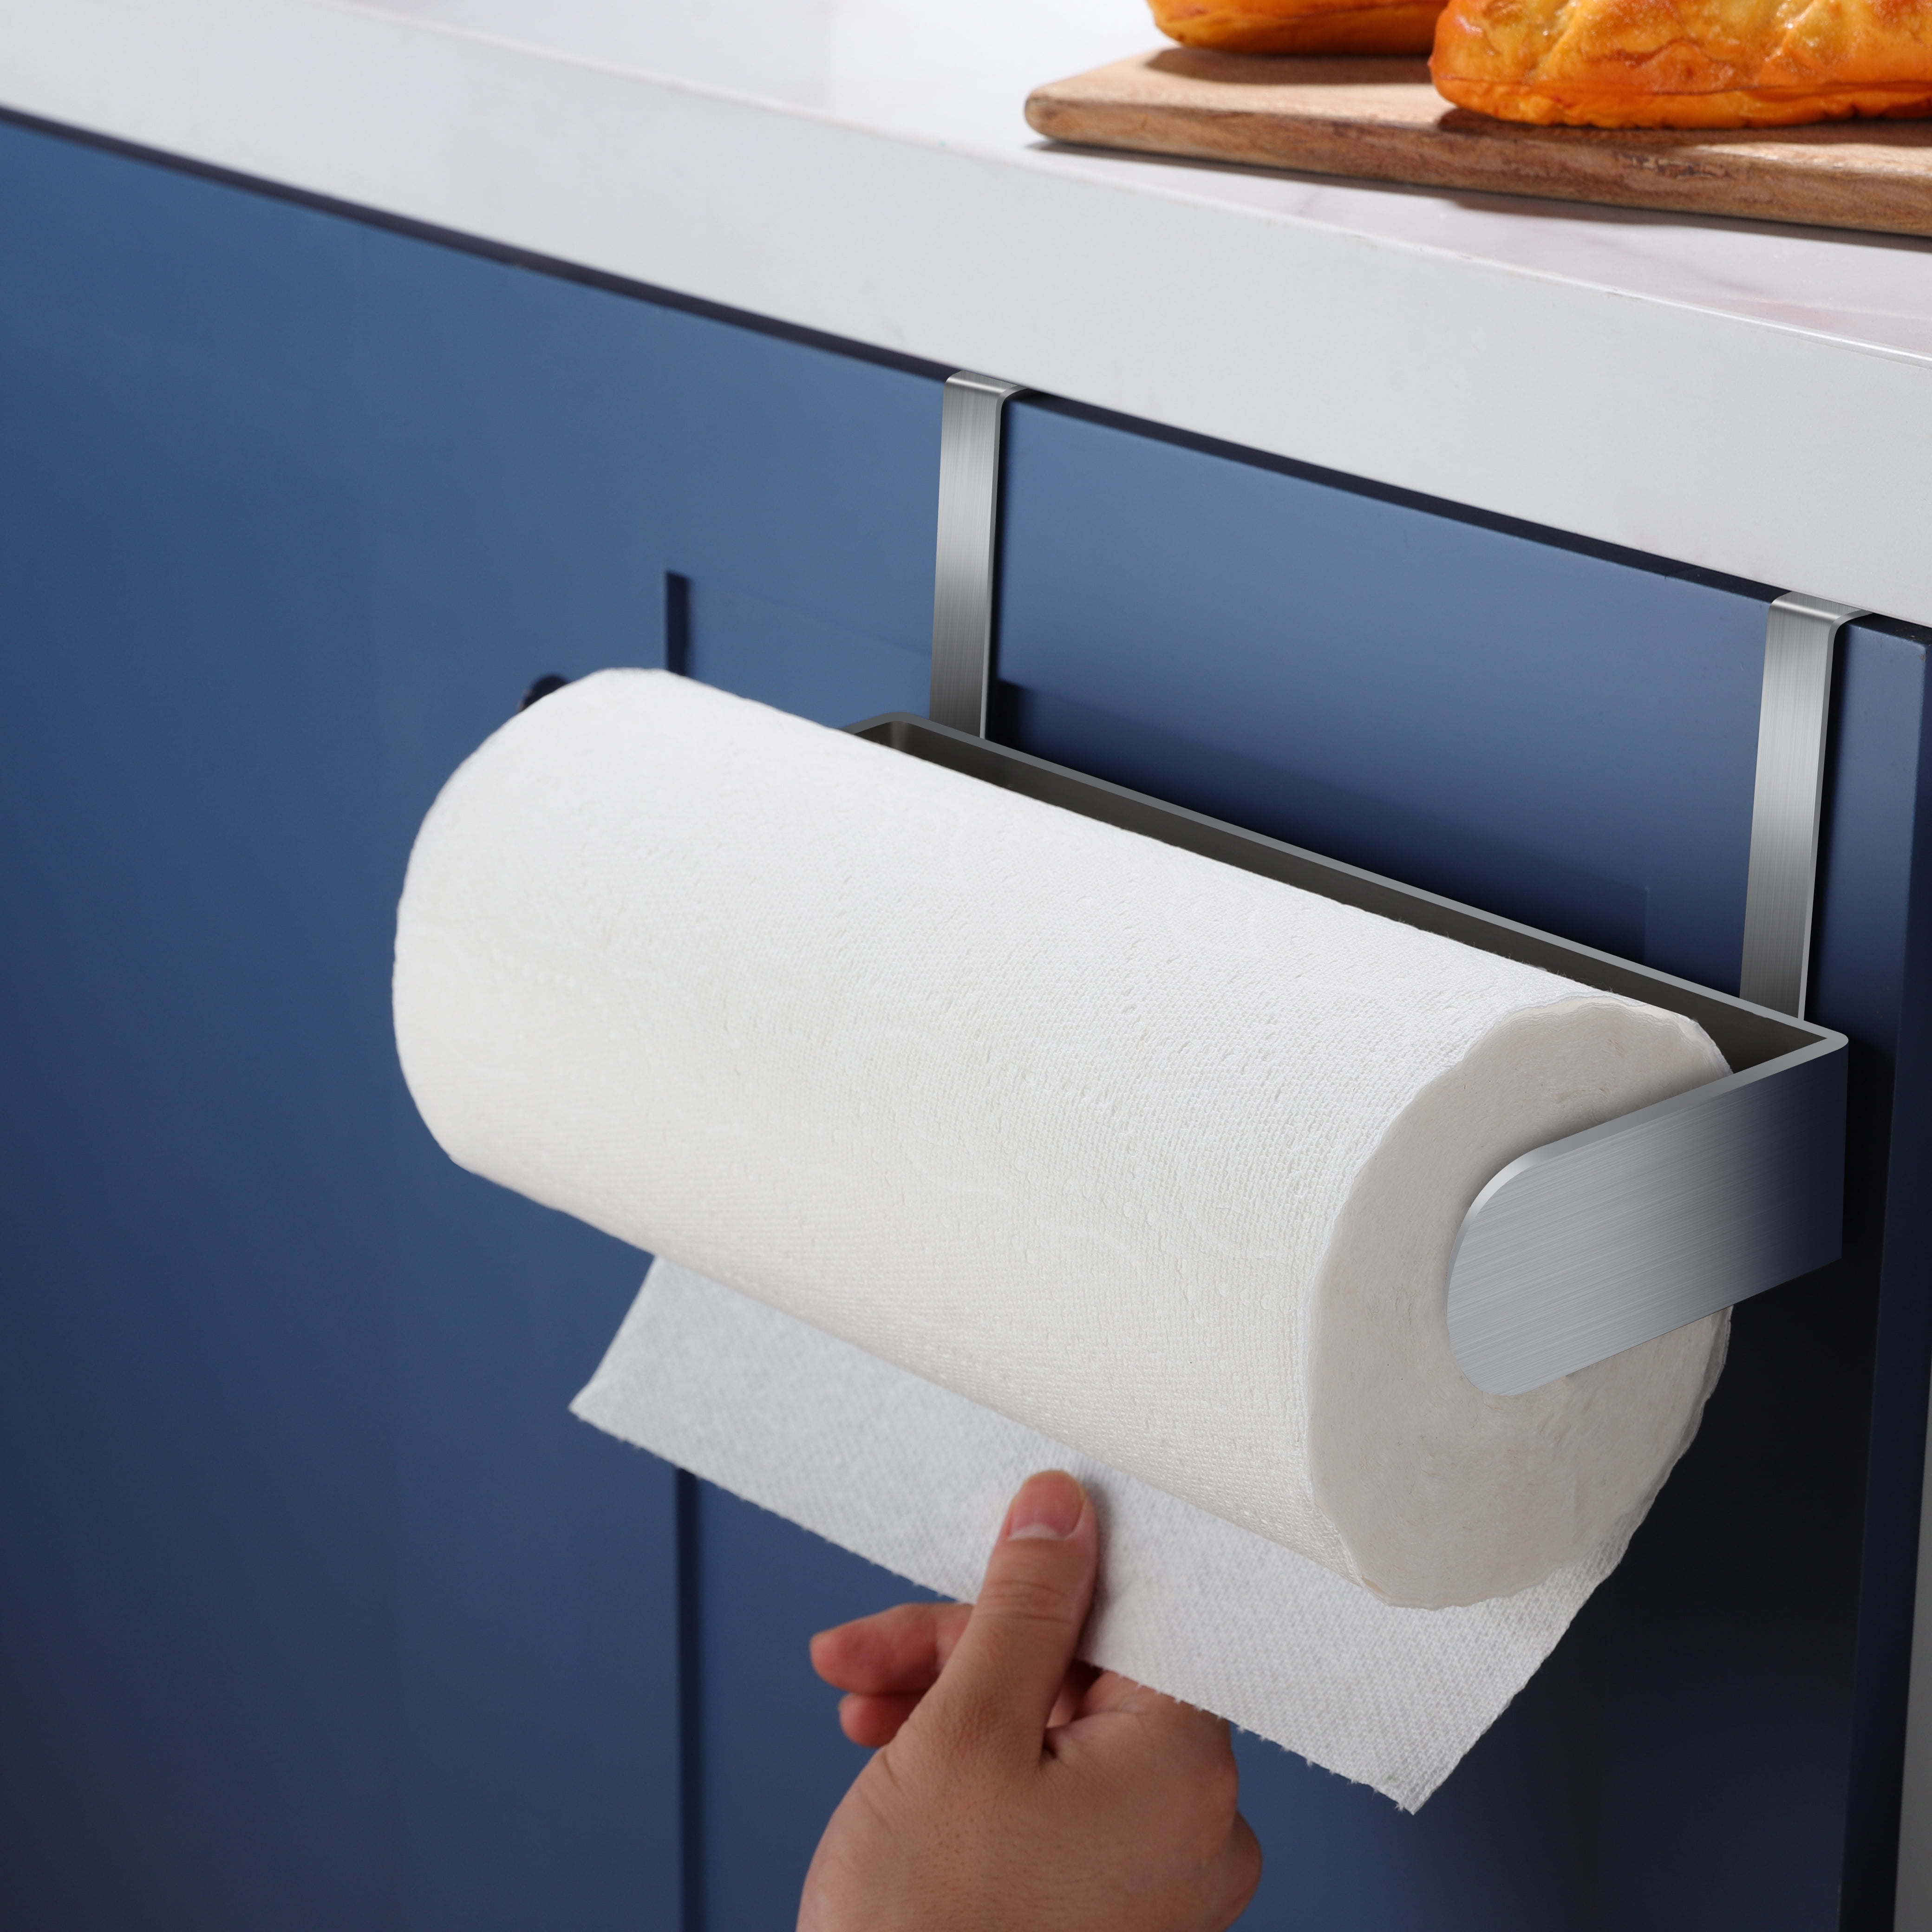  YIGII Paper Towel Holder Under Cabinet Mount - Self Adhesive Paper  Towel Rack or Wall Mounted for Kitchen, 12 Inch Bar - Fit All Roll Sizes,  Stainless Steel